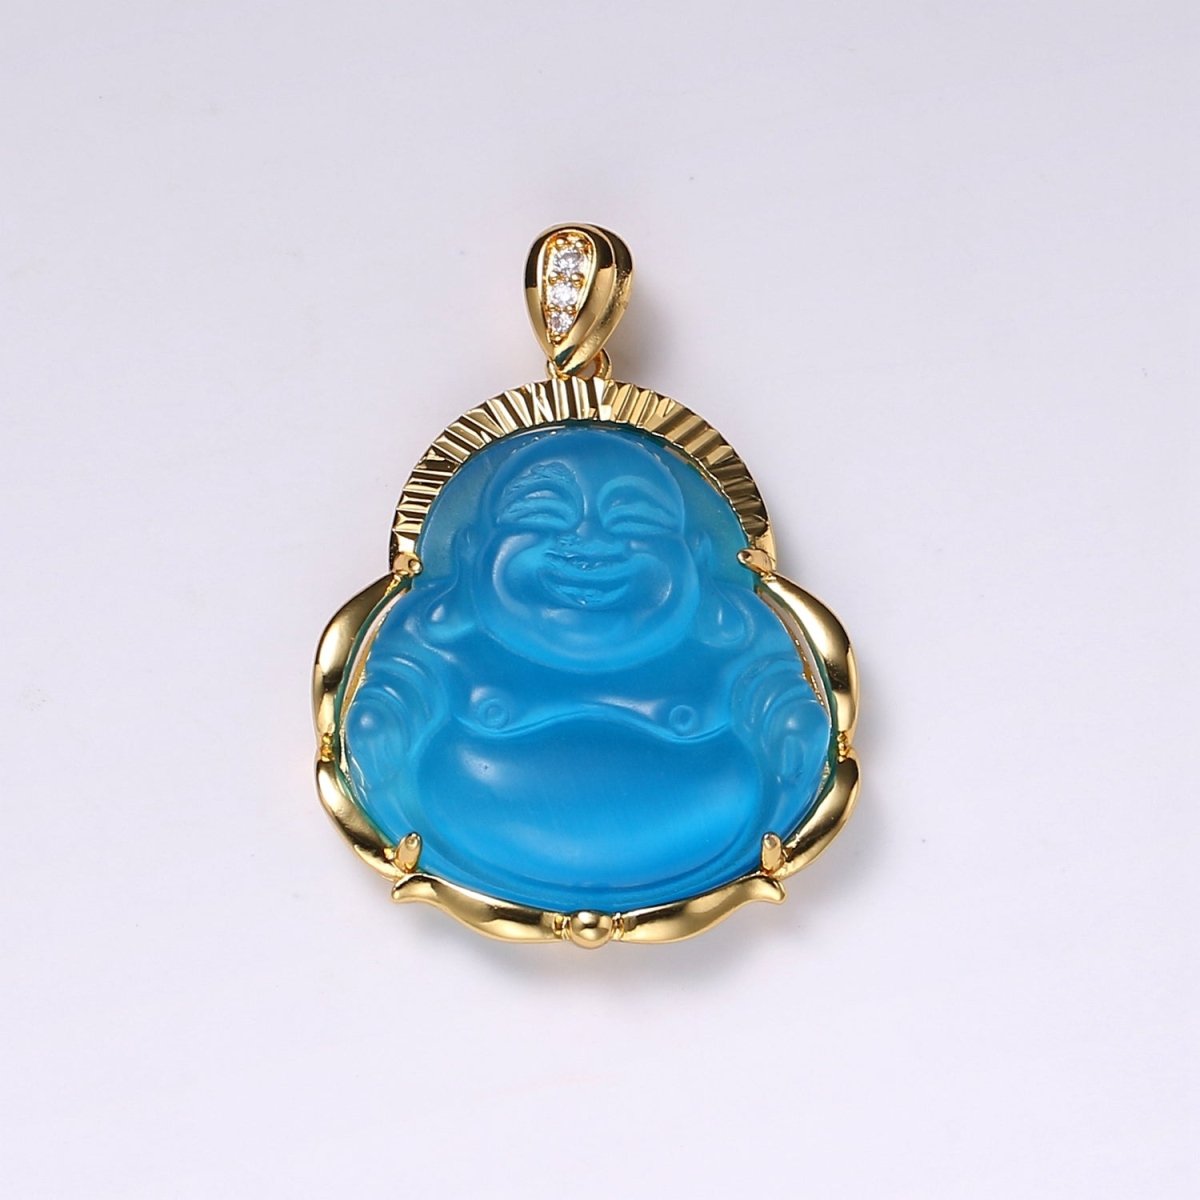 Crystal Buddha Pendant Necklace Natural Carved Charming Gifts Amulet  Jewelry - MegaDealMart